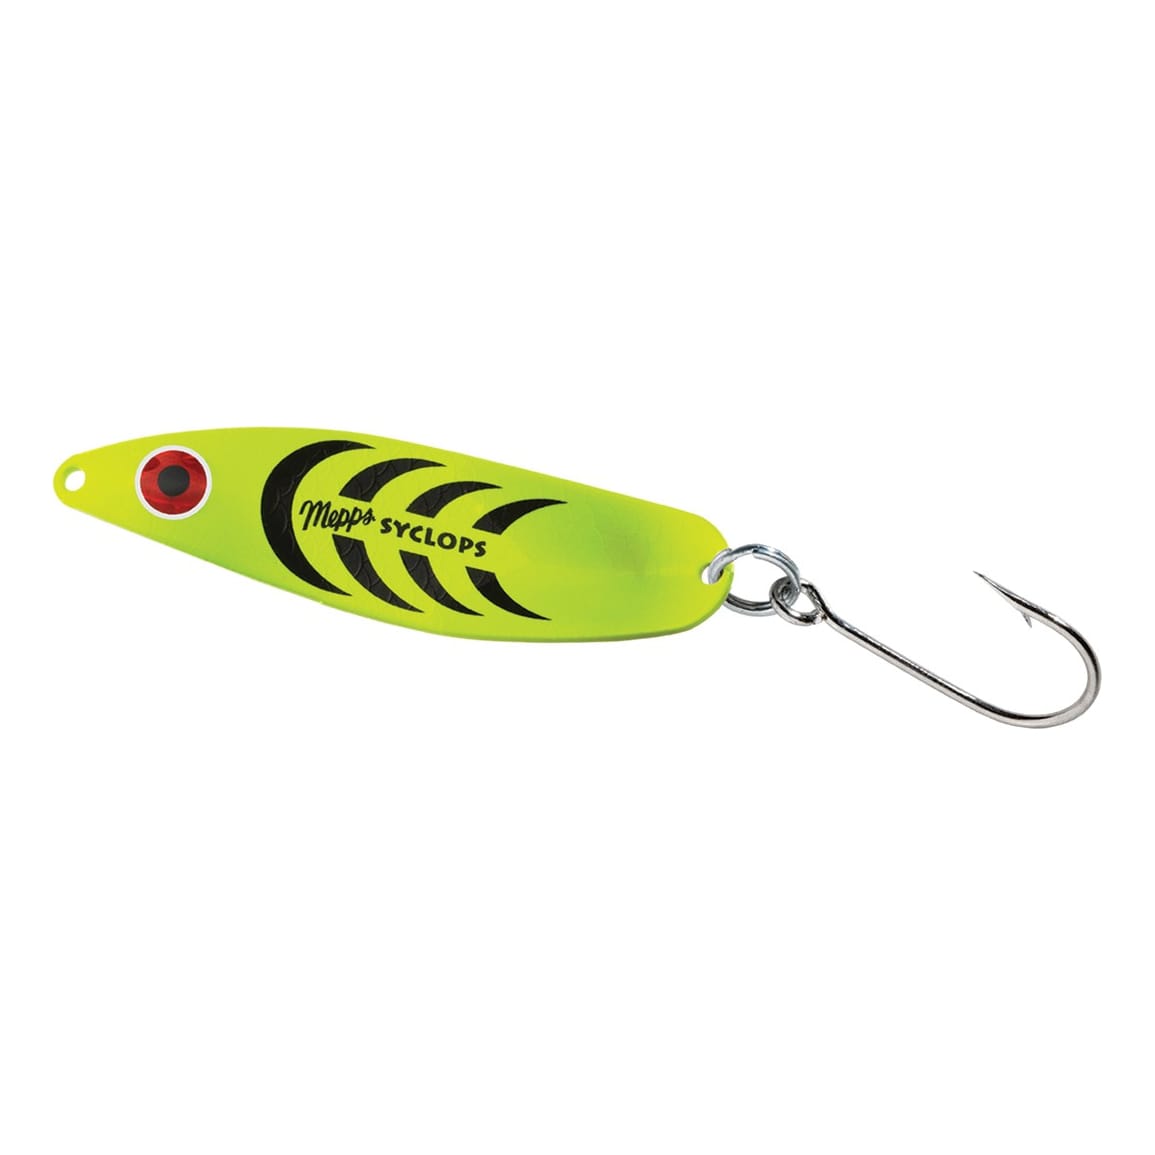 Luhr Jensen Hot Shot size 70 Green with Gold Scale – My Bait Shop, LLC